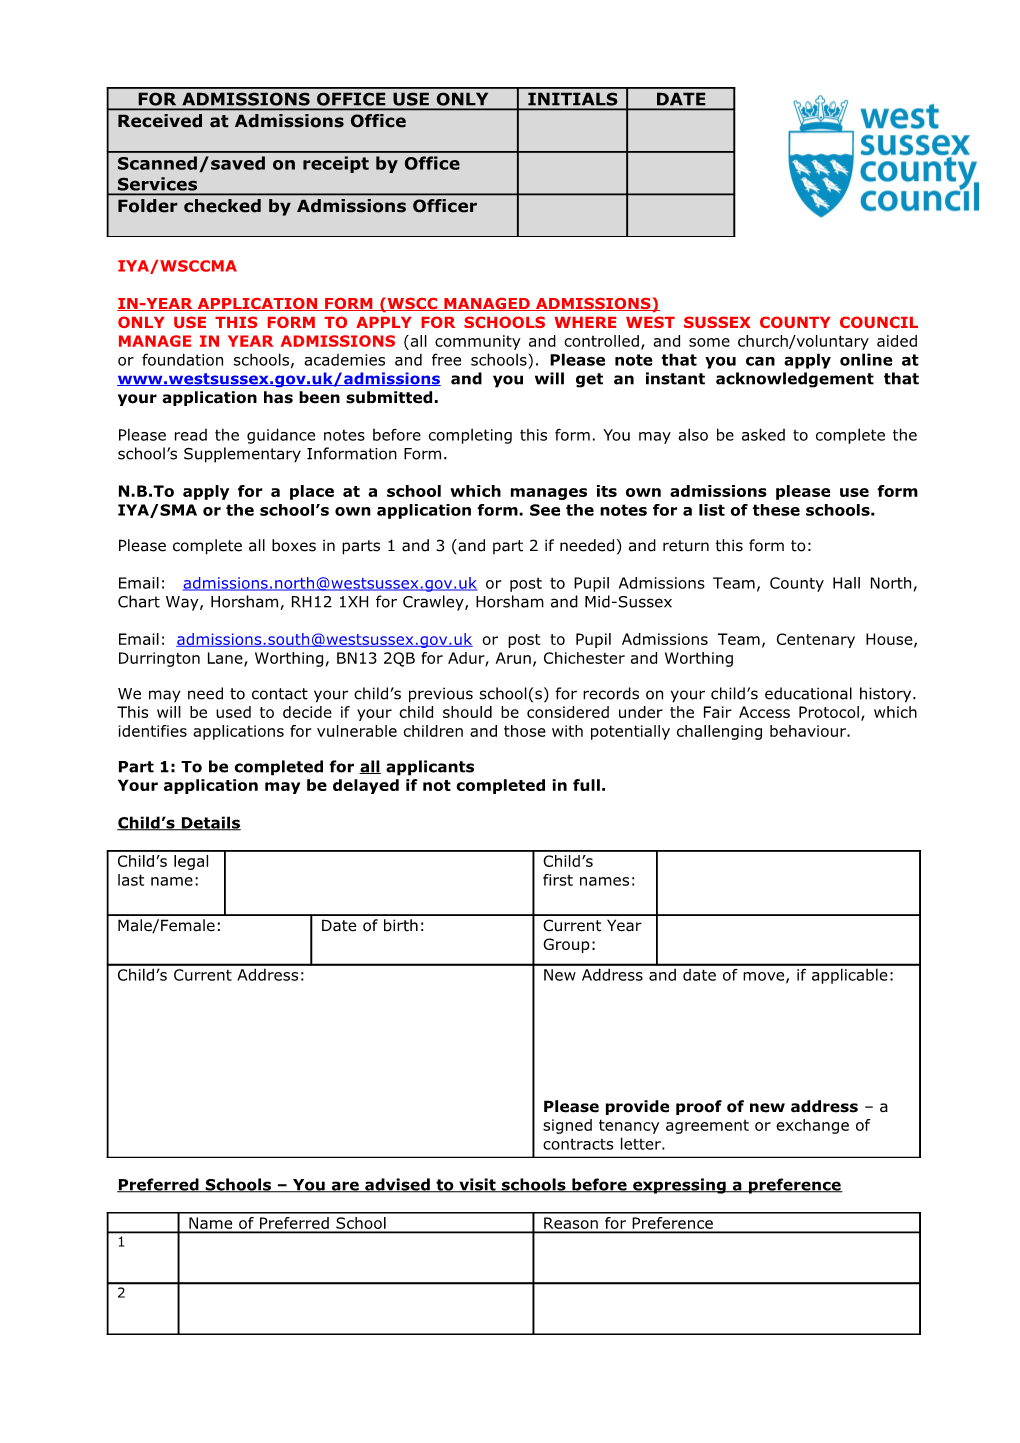 In-Year Application Form (Wscc Managed Admissions)